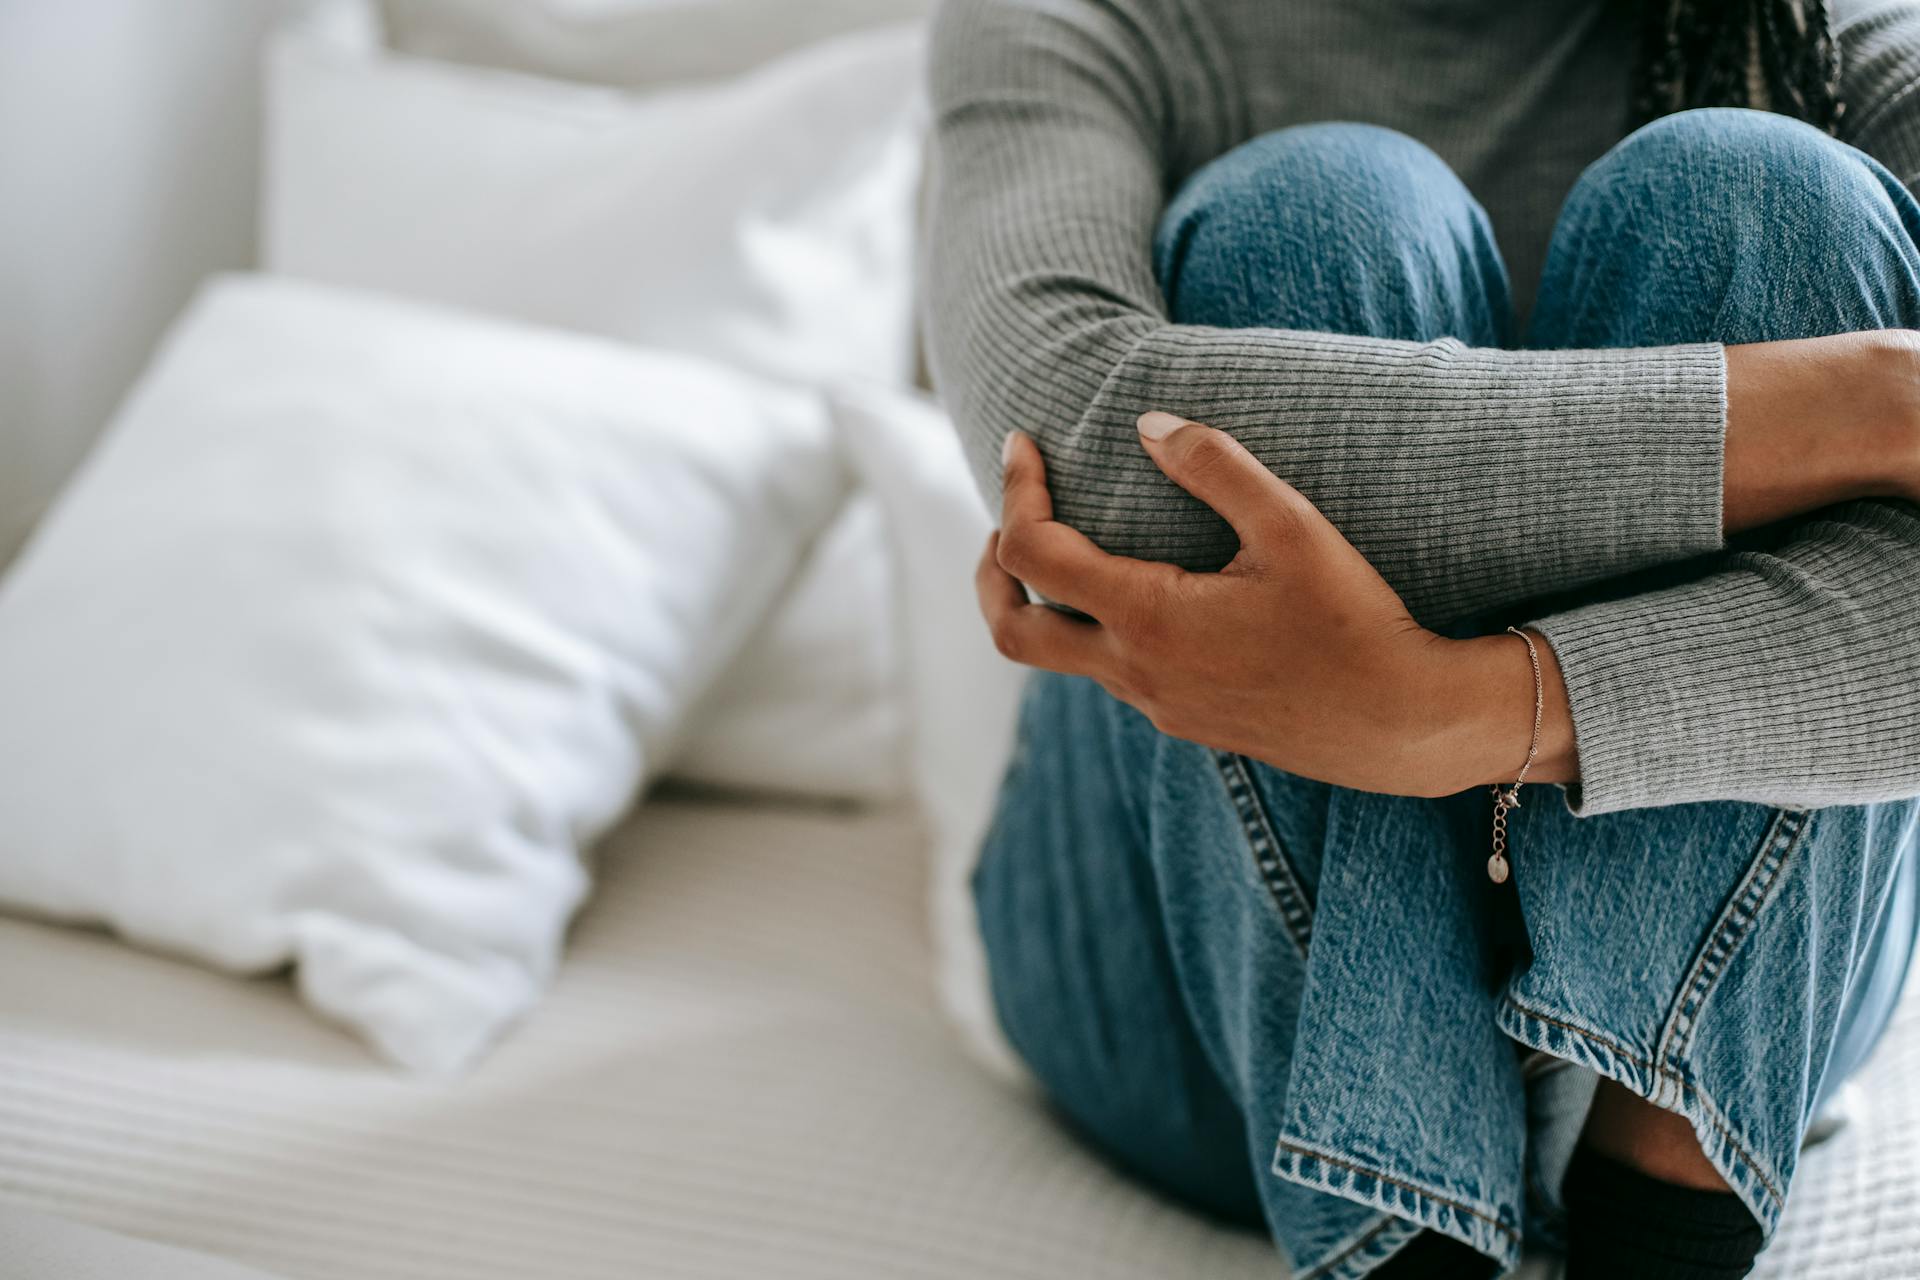 A woman sitting with her legs folded | Source: Pexels